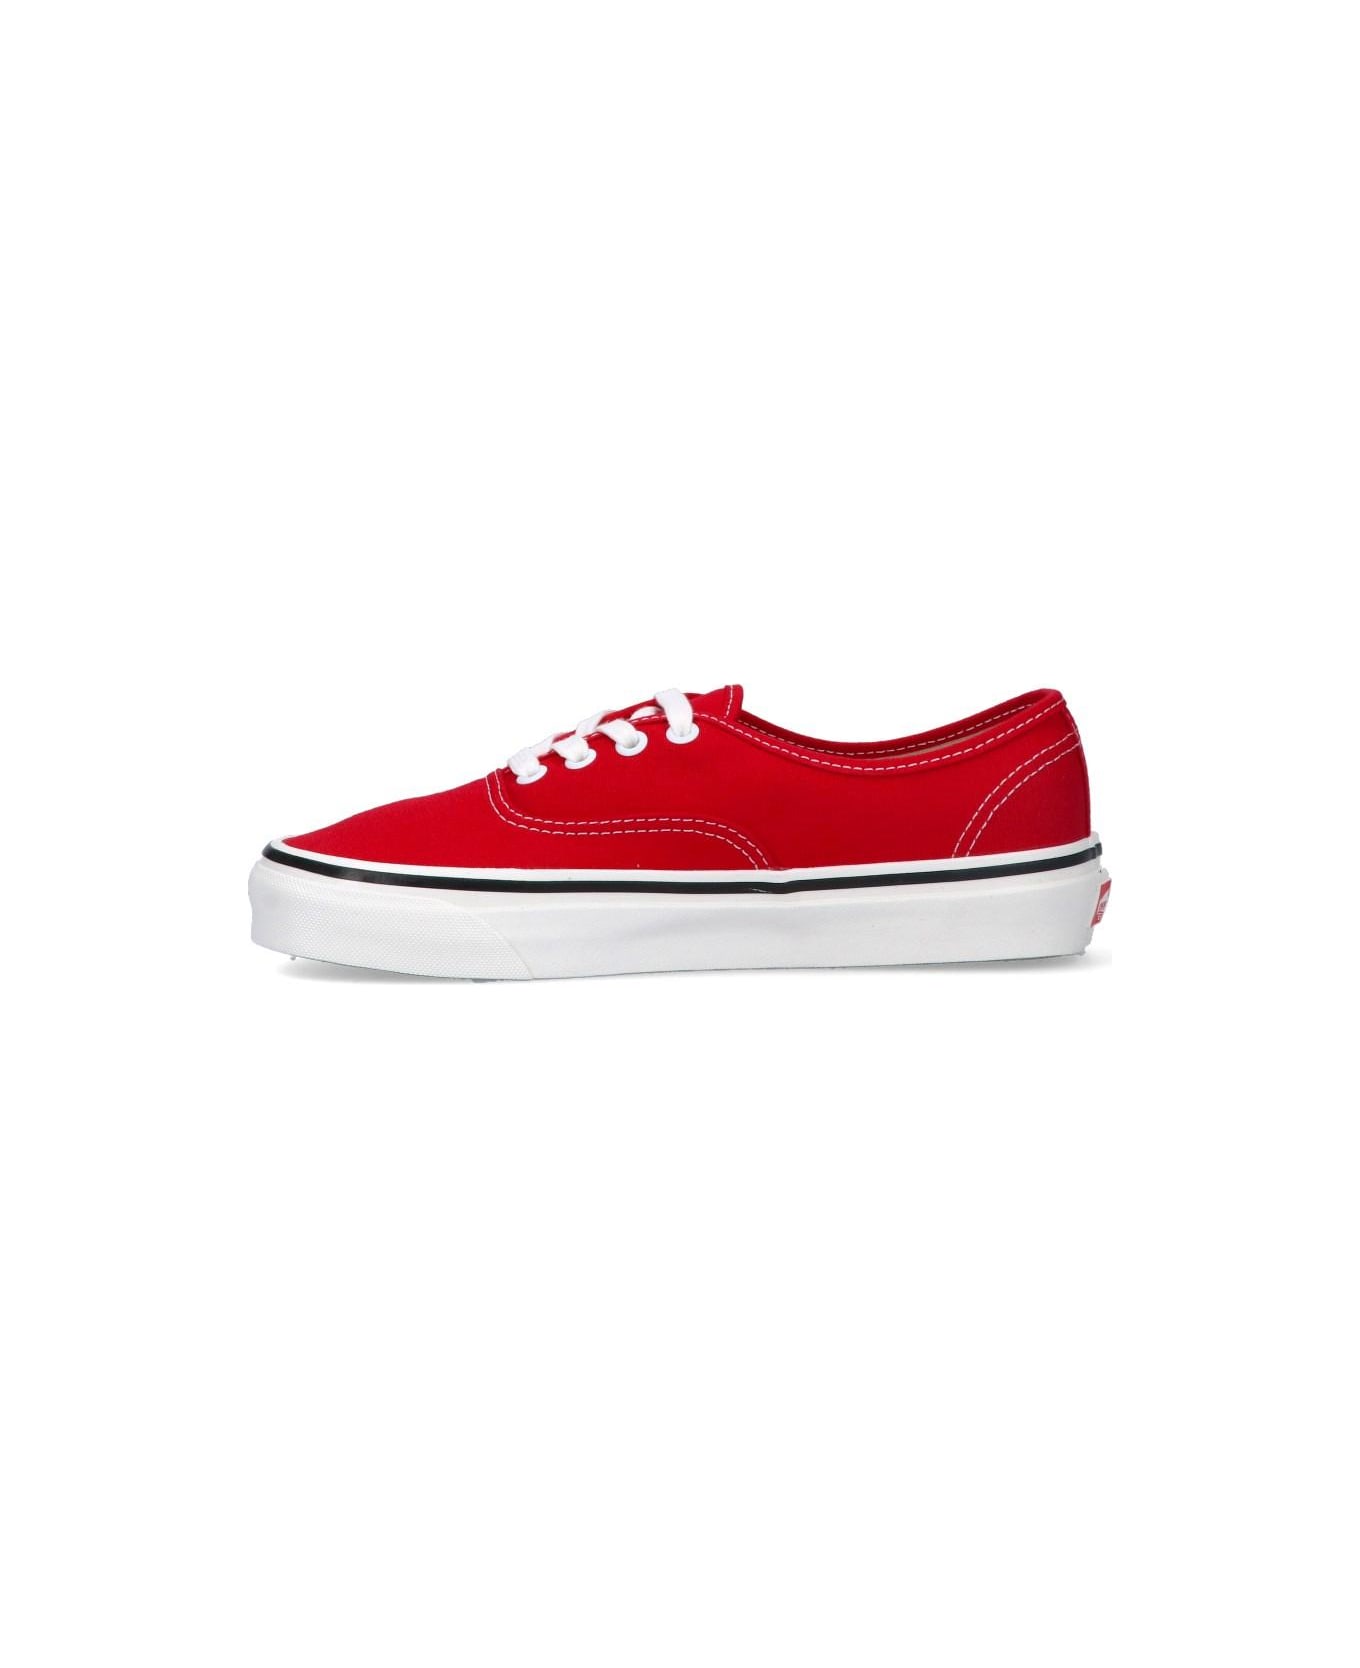 Vans 'anaheim Factory Authentic 44 Dx' Sneakers - Red スニーカー